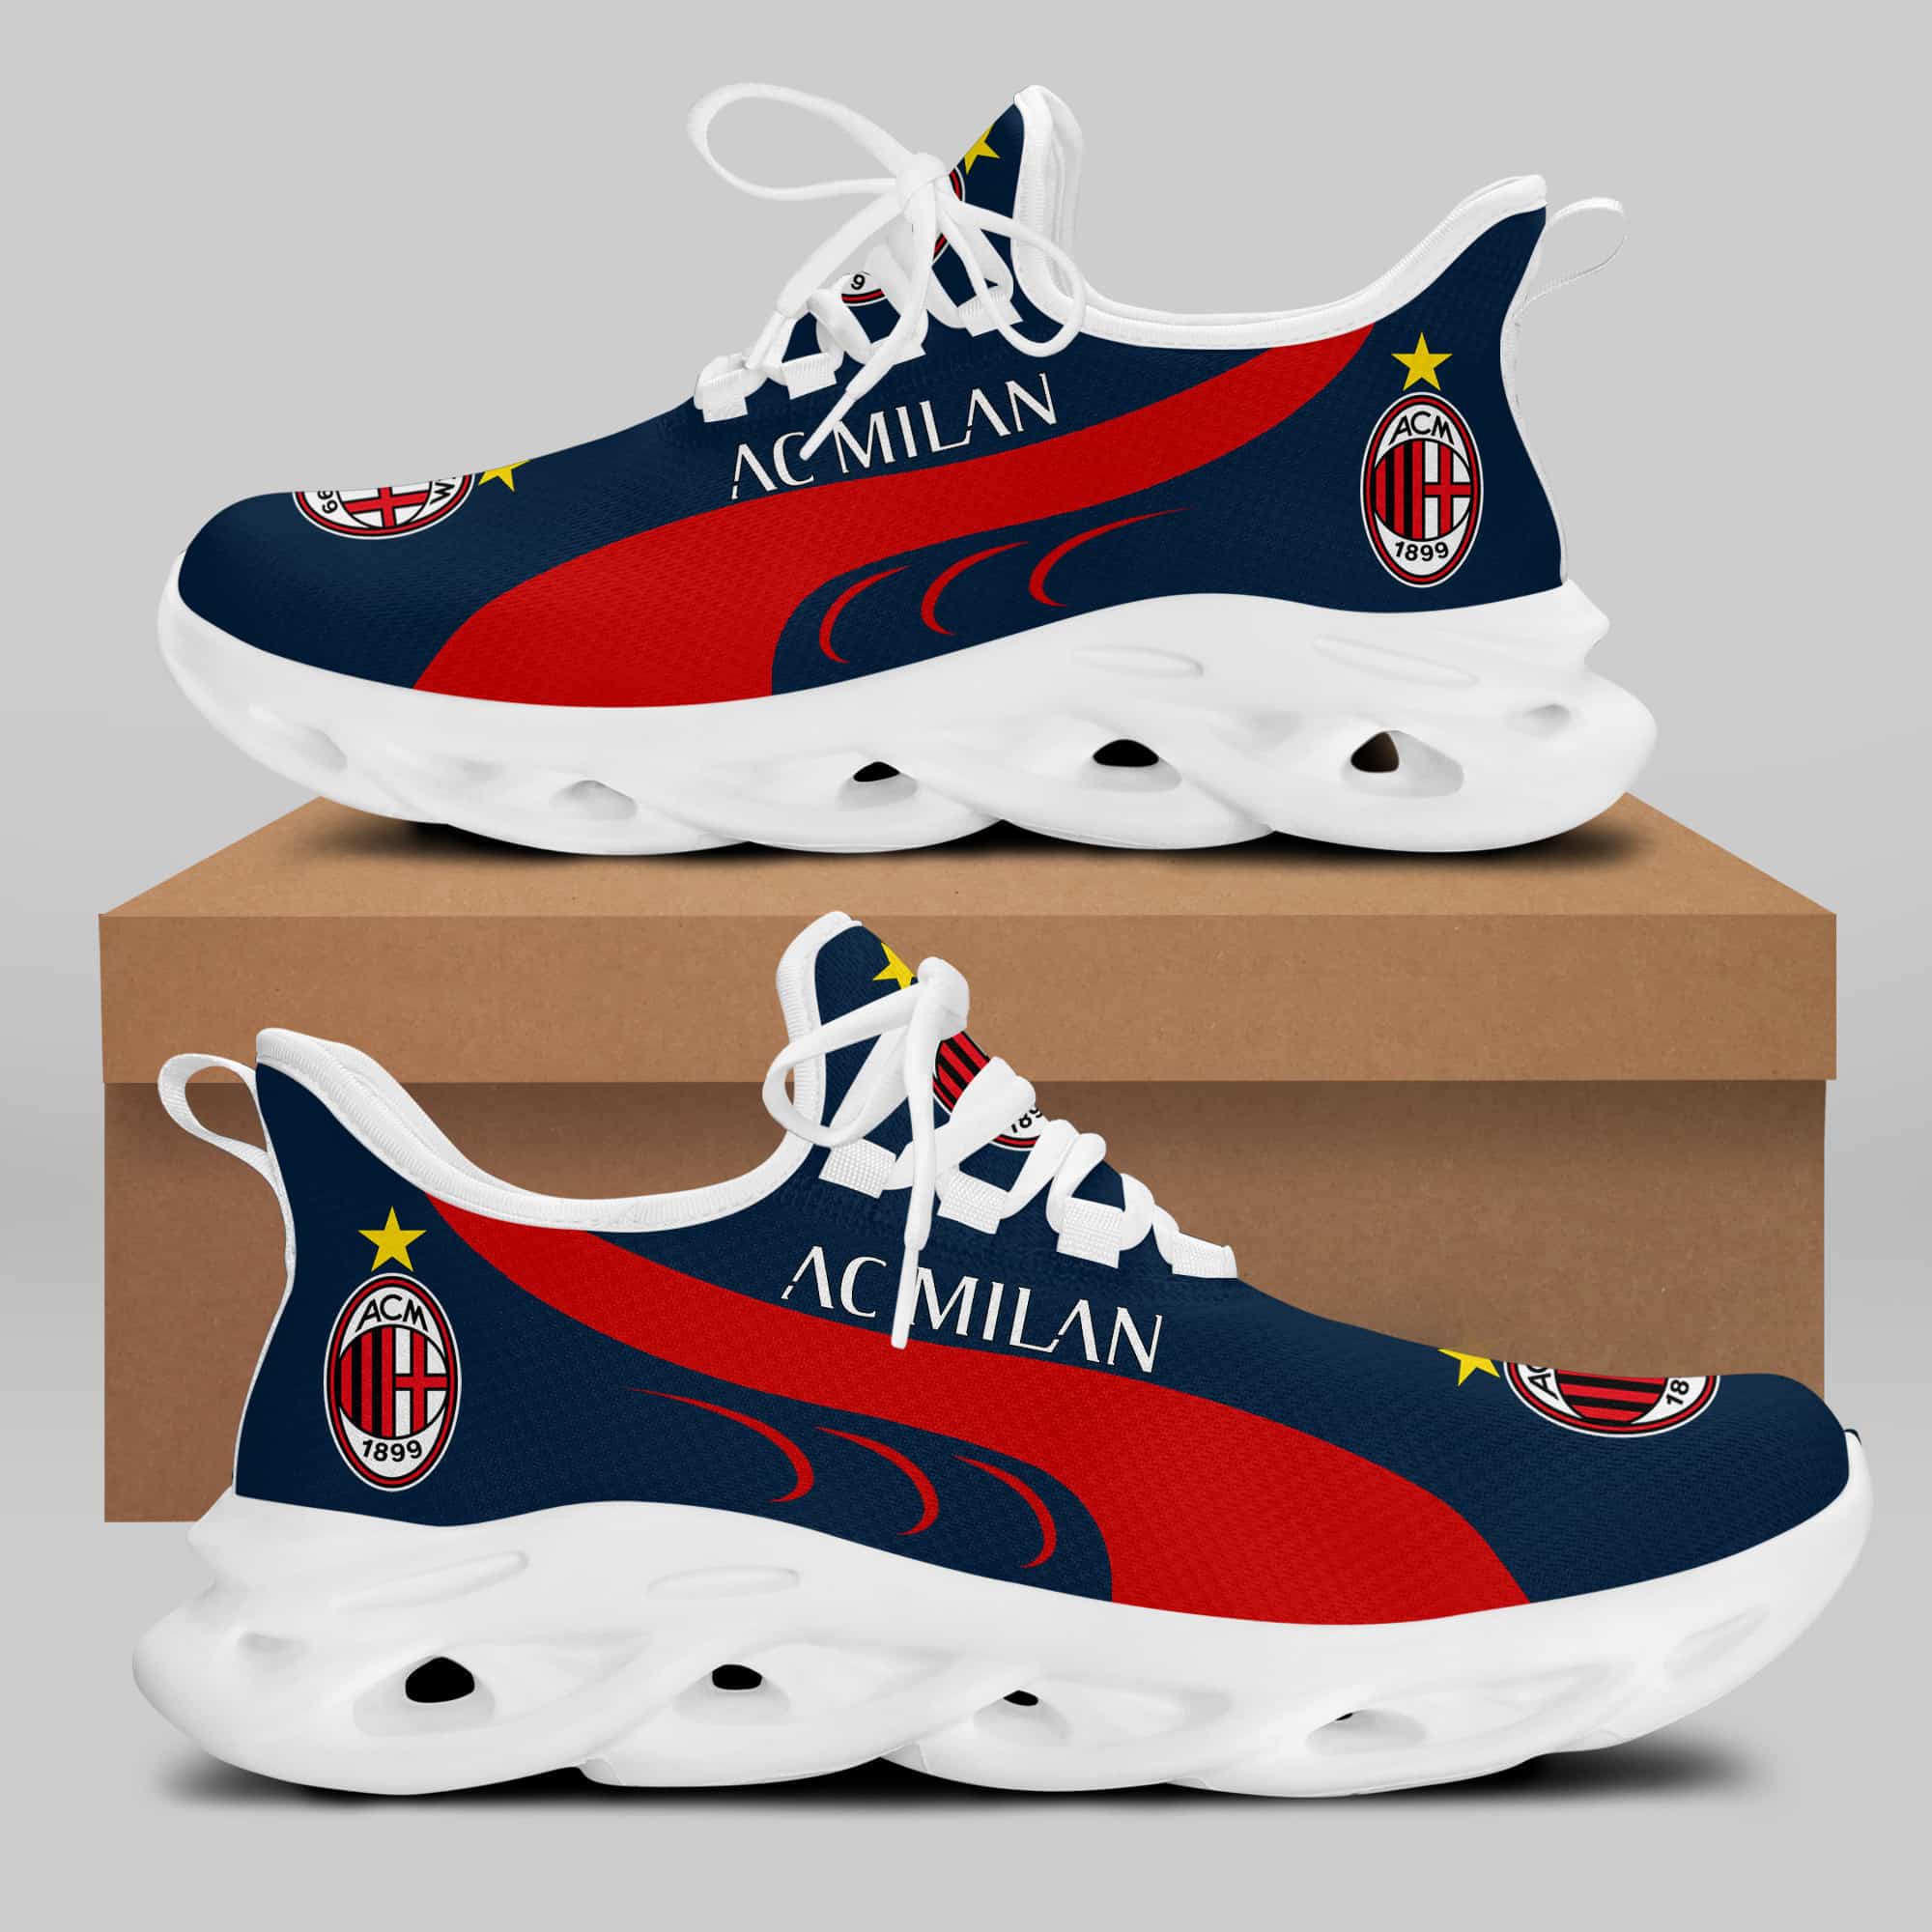 Ac Milan Running Shoes Max Soul Shoes Sneakers Ver 6 2